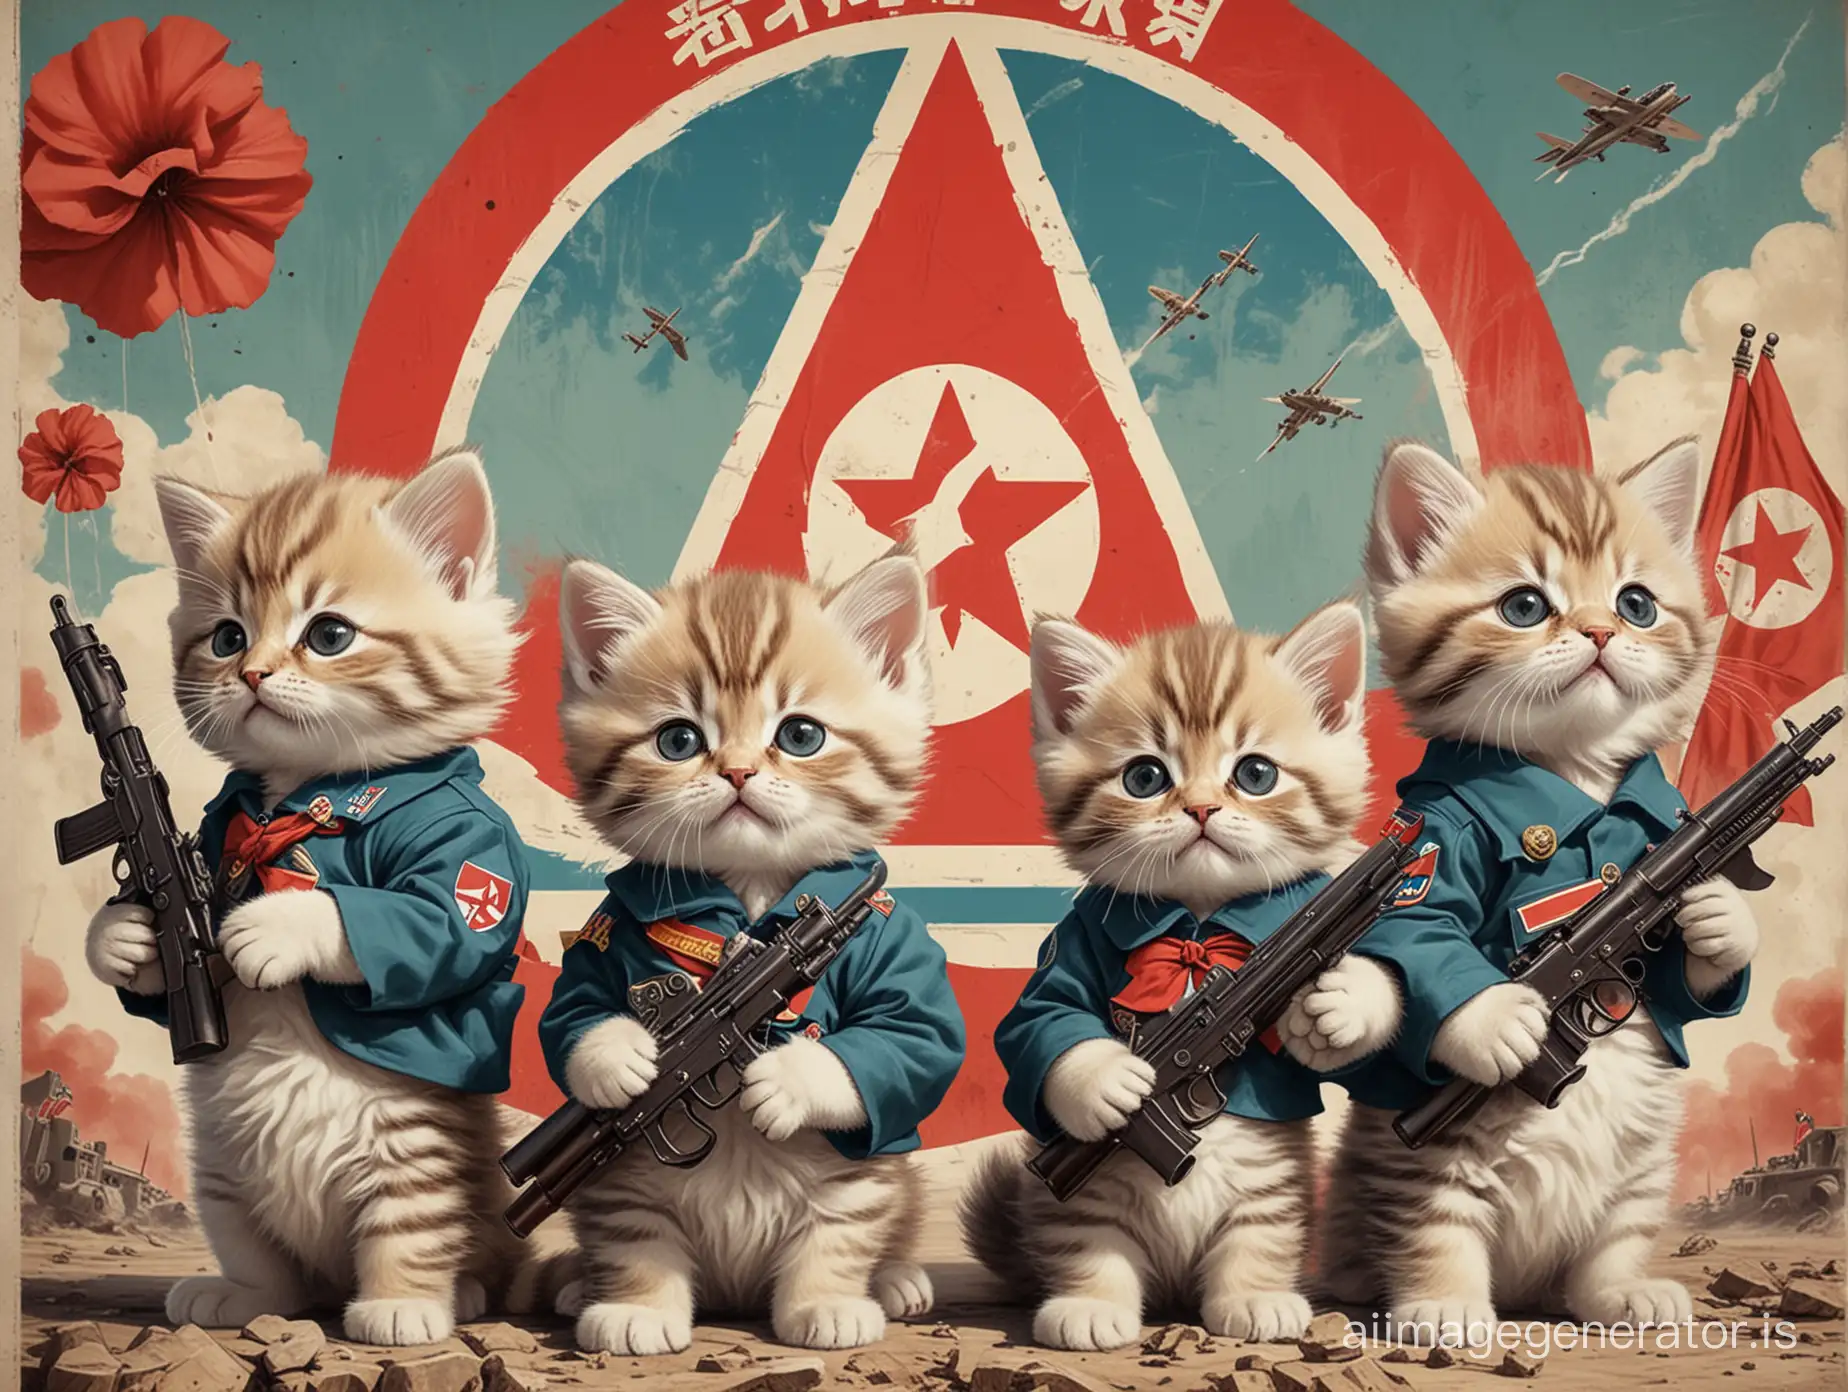 North Korean propaganda style poster depicting kittens in uniforms with guns and flags with mushroom cloud in background and Korean slogans in large font.
 Cold War illustration style, (weird:1.3). In the style of dramatic Cold War propaganda